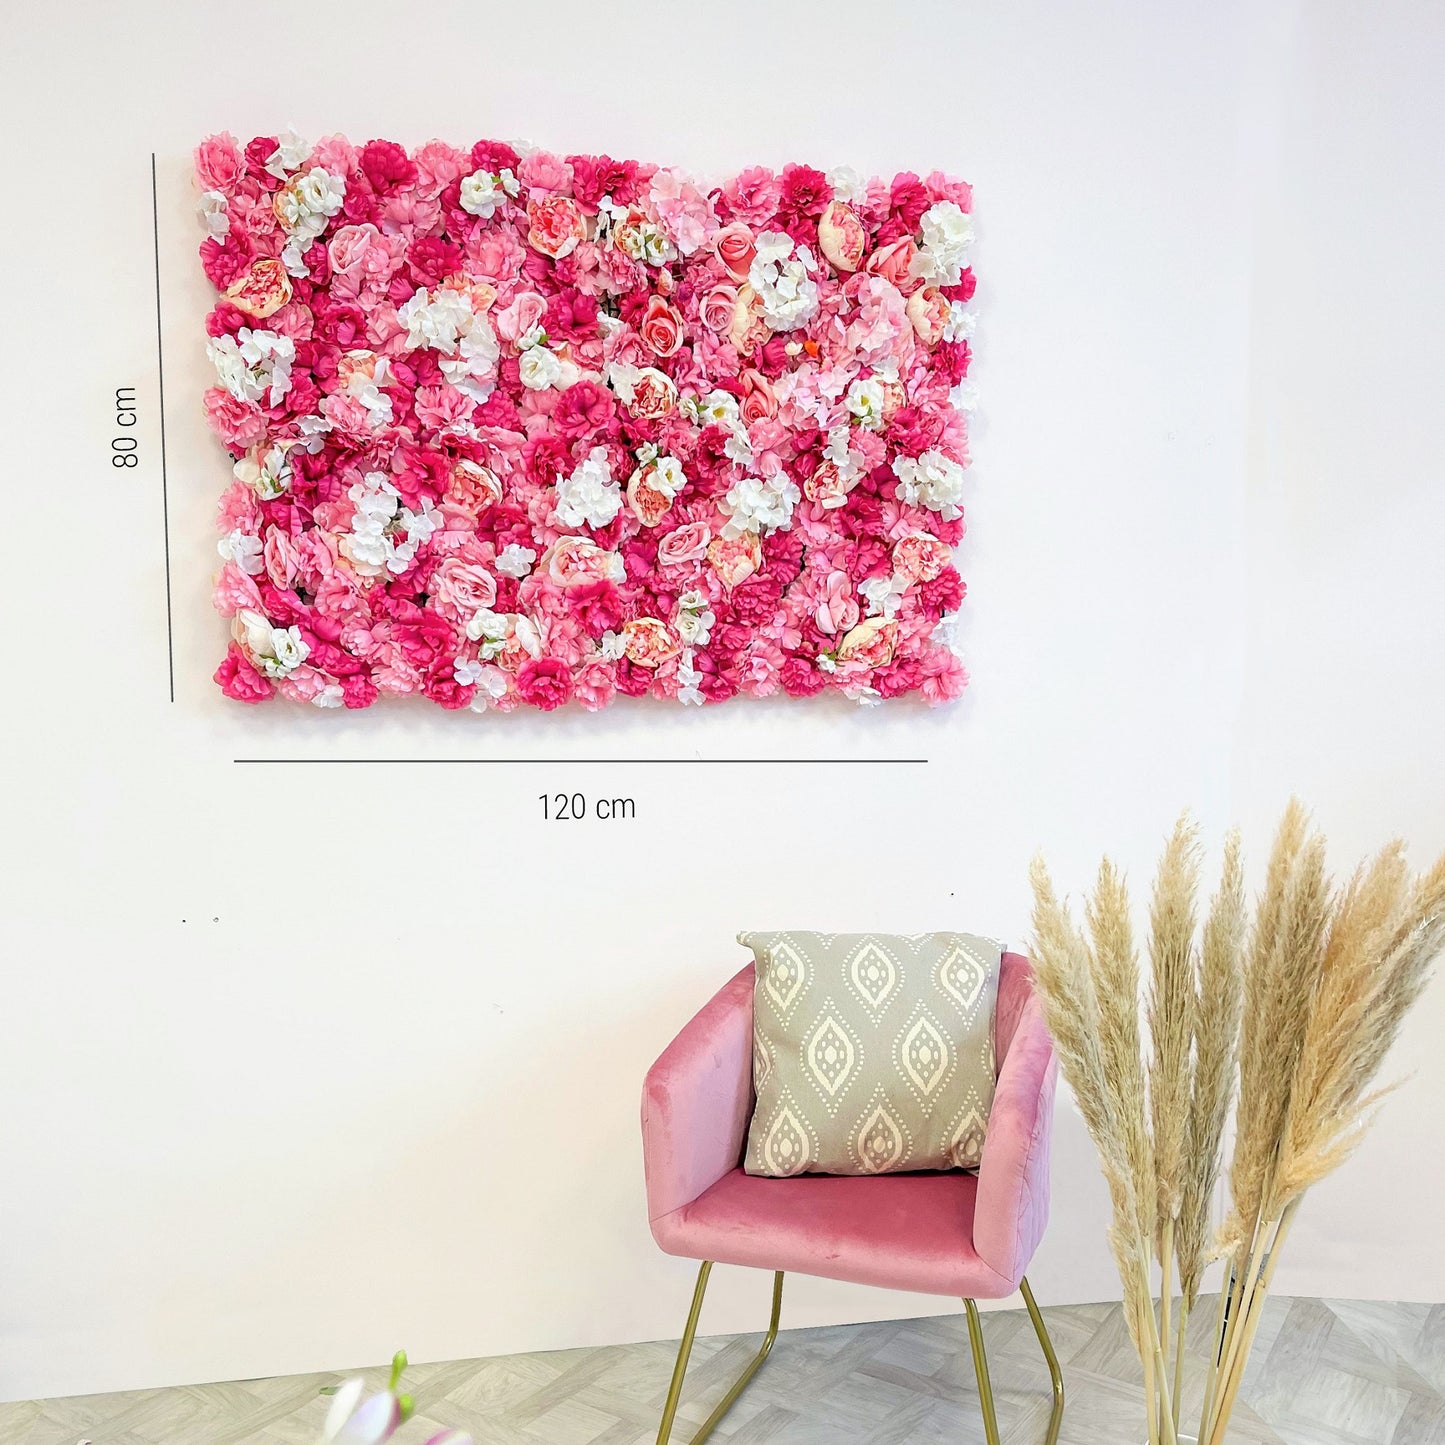 Flower wall "MISS ROYAL" made of Realtouch artificial plants